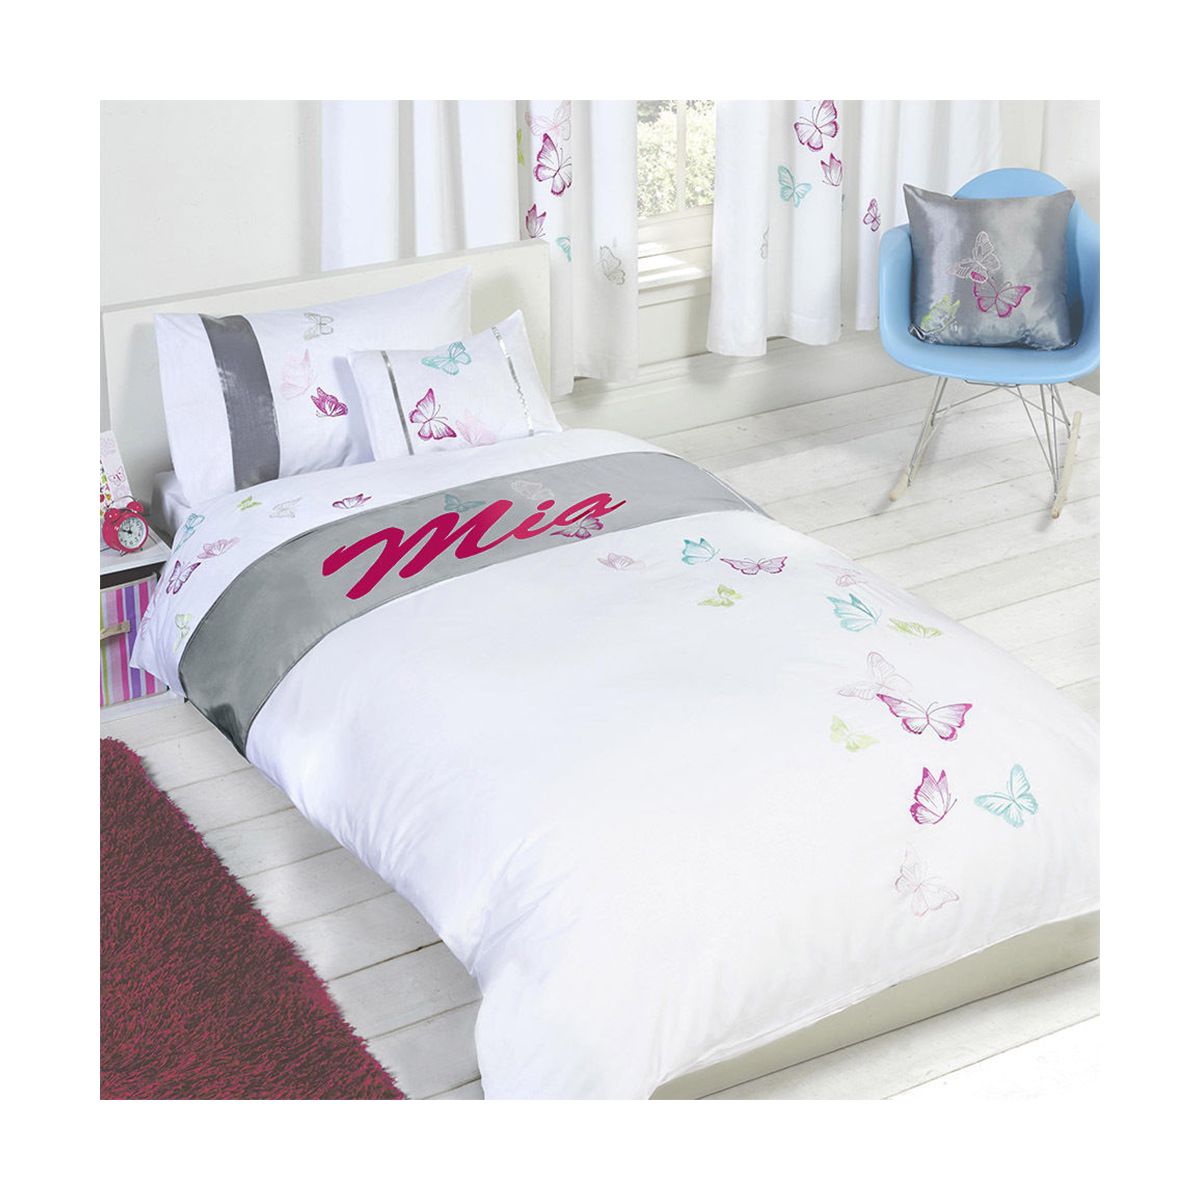 Tobias Baker Personalised Butterfly Duvet Cover Pillow Case Bedding Set - Mia, Double